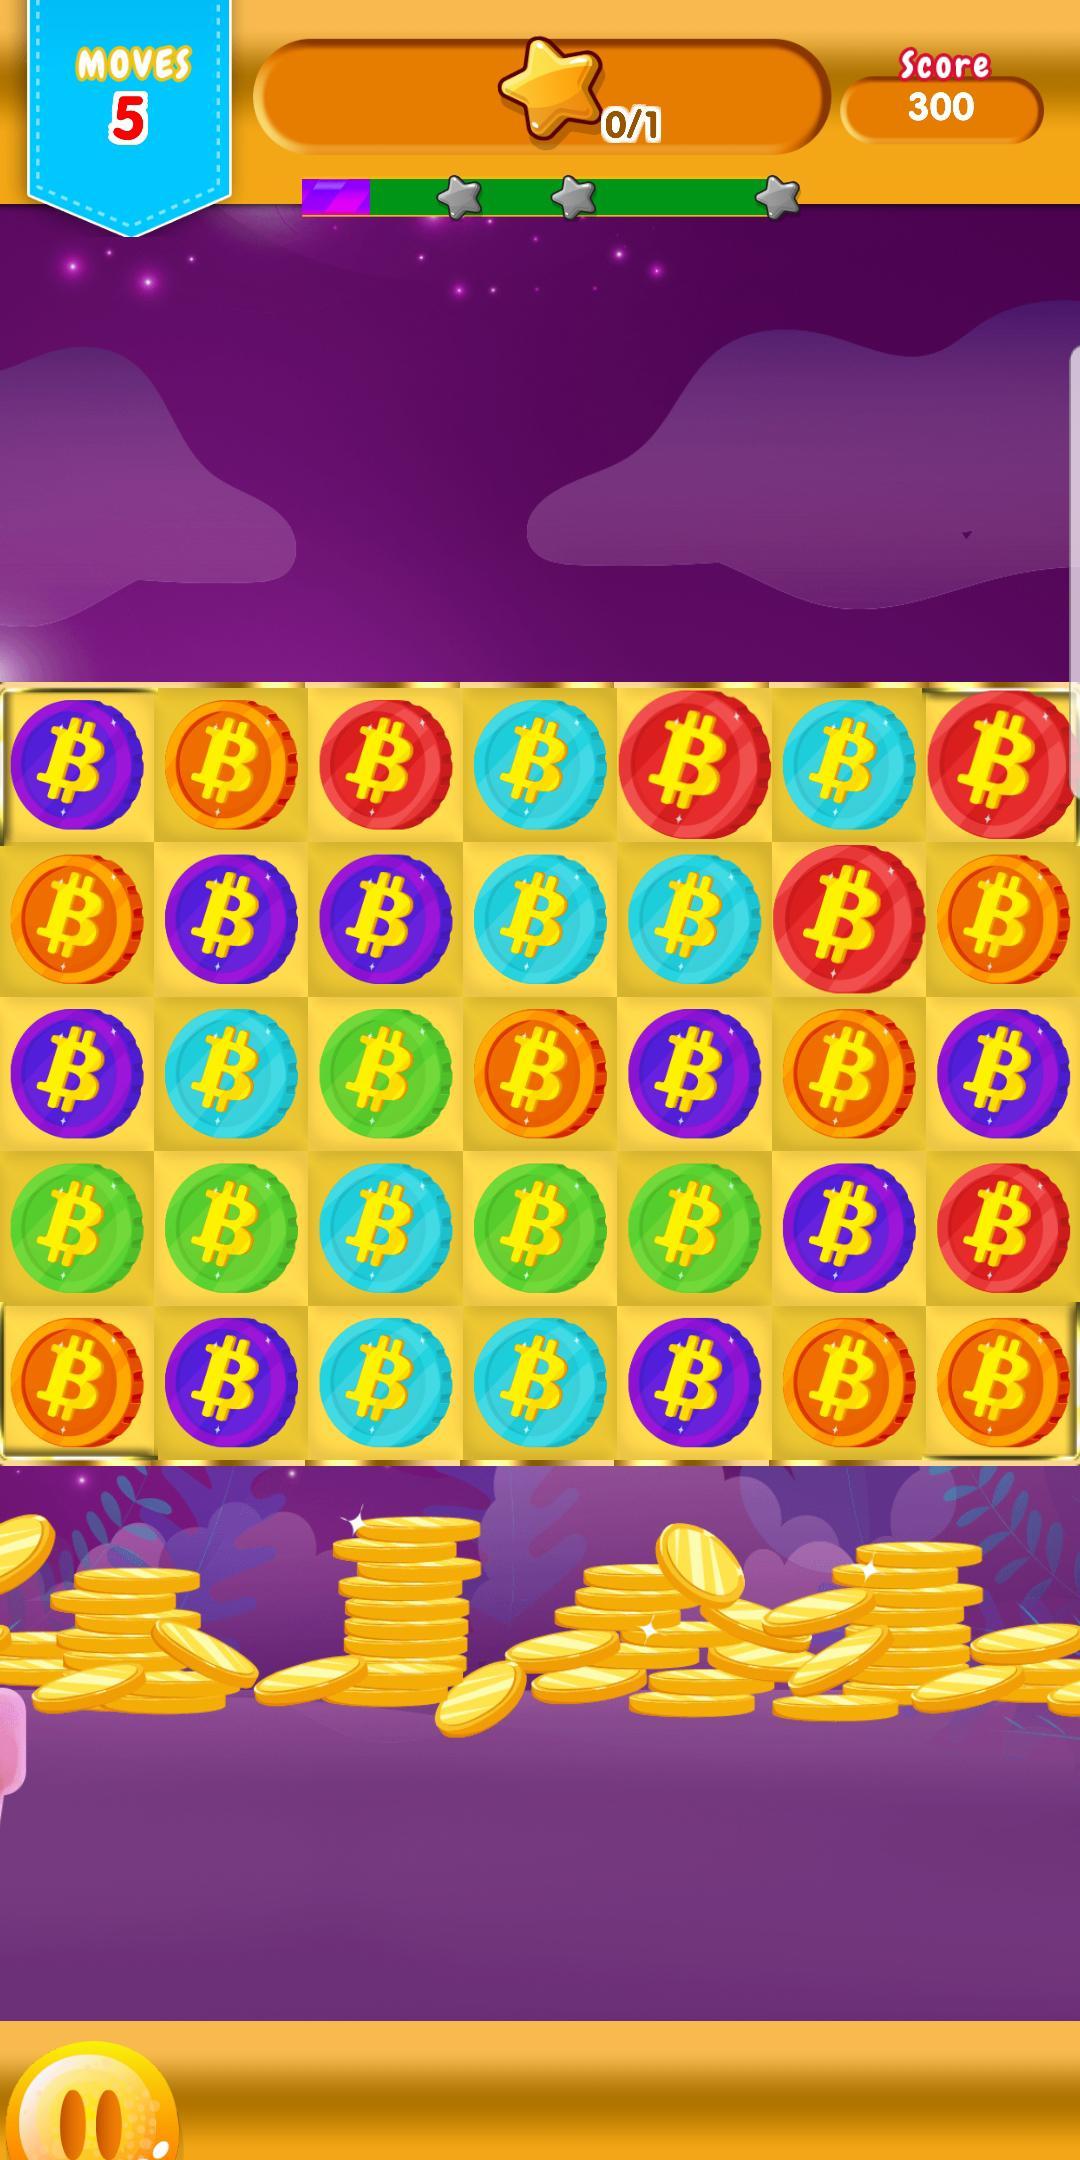 Bitcoin Blast Earn Real Bitcoin For Android Apk Download - 